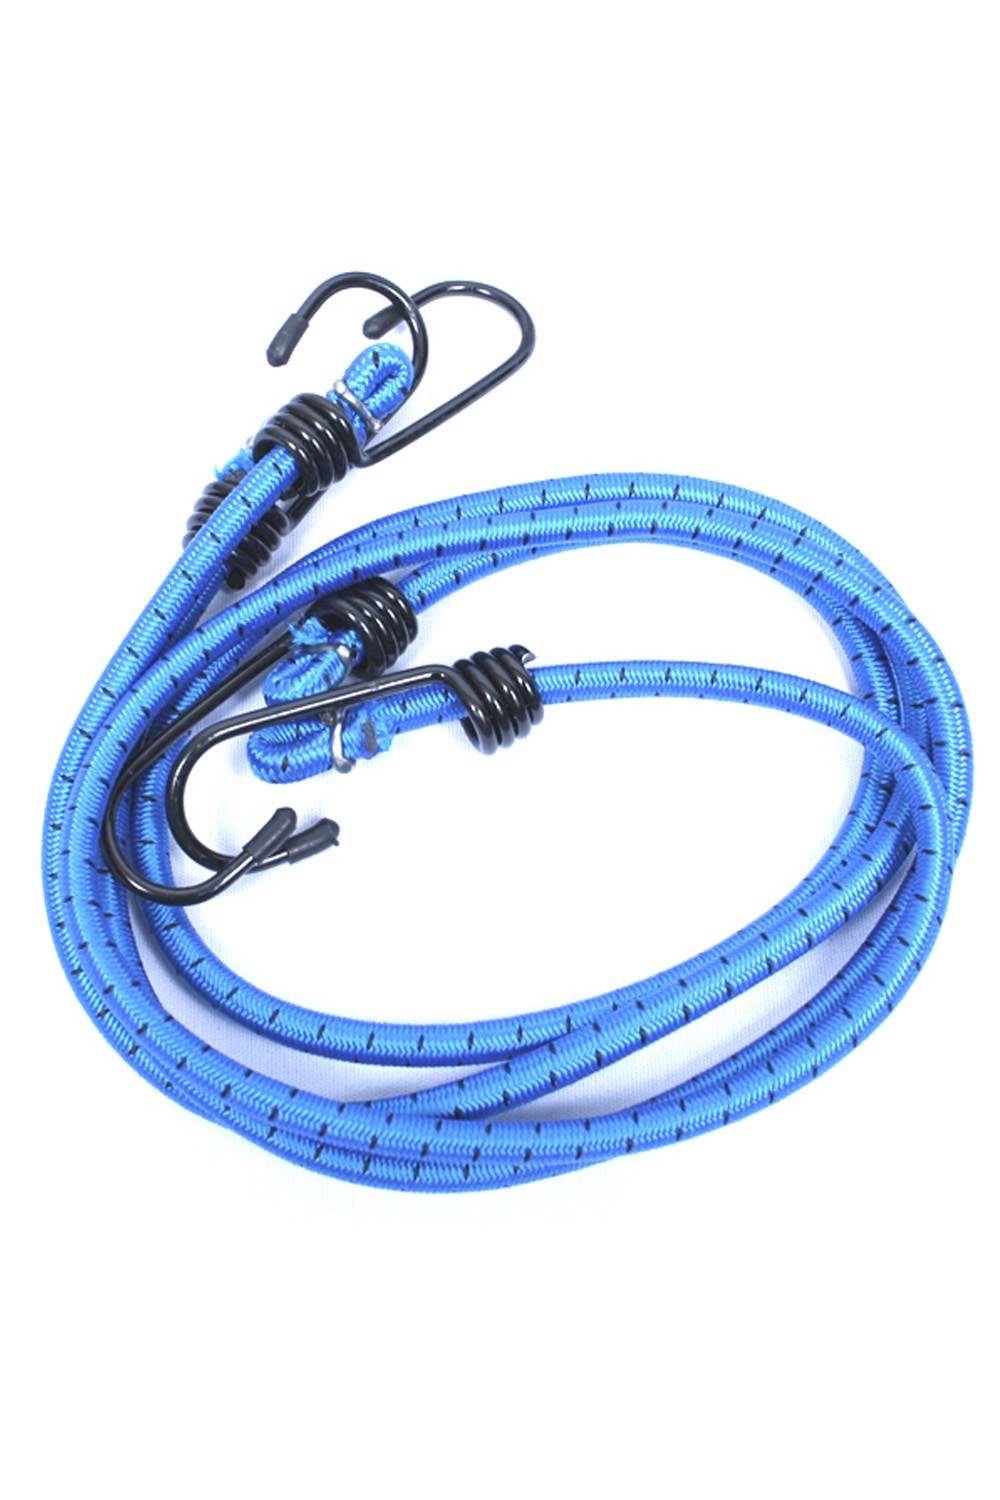 Mountain Warehouse Bungee Cords 2 Pack Blue